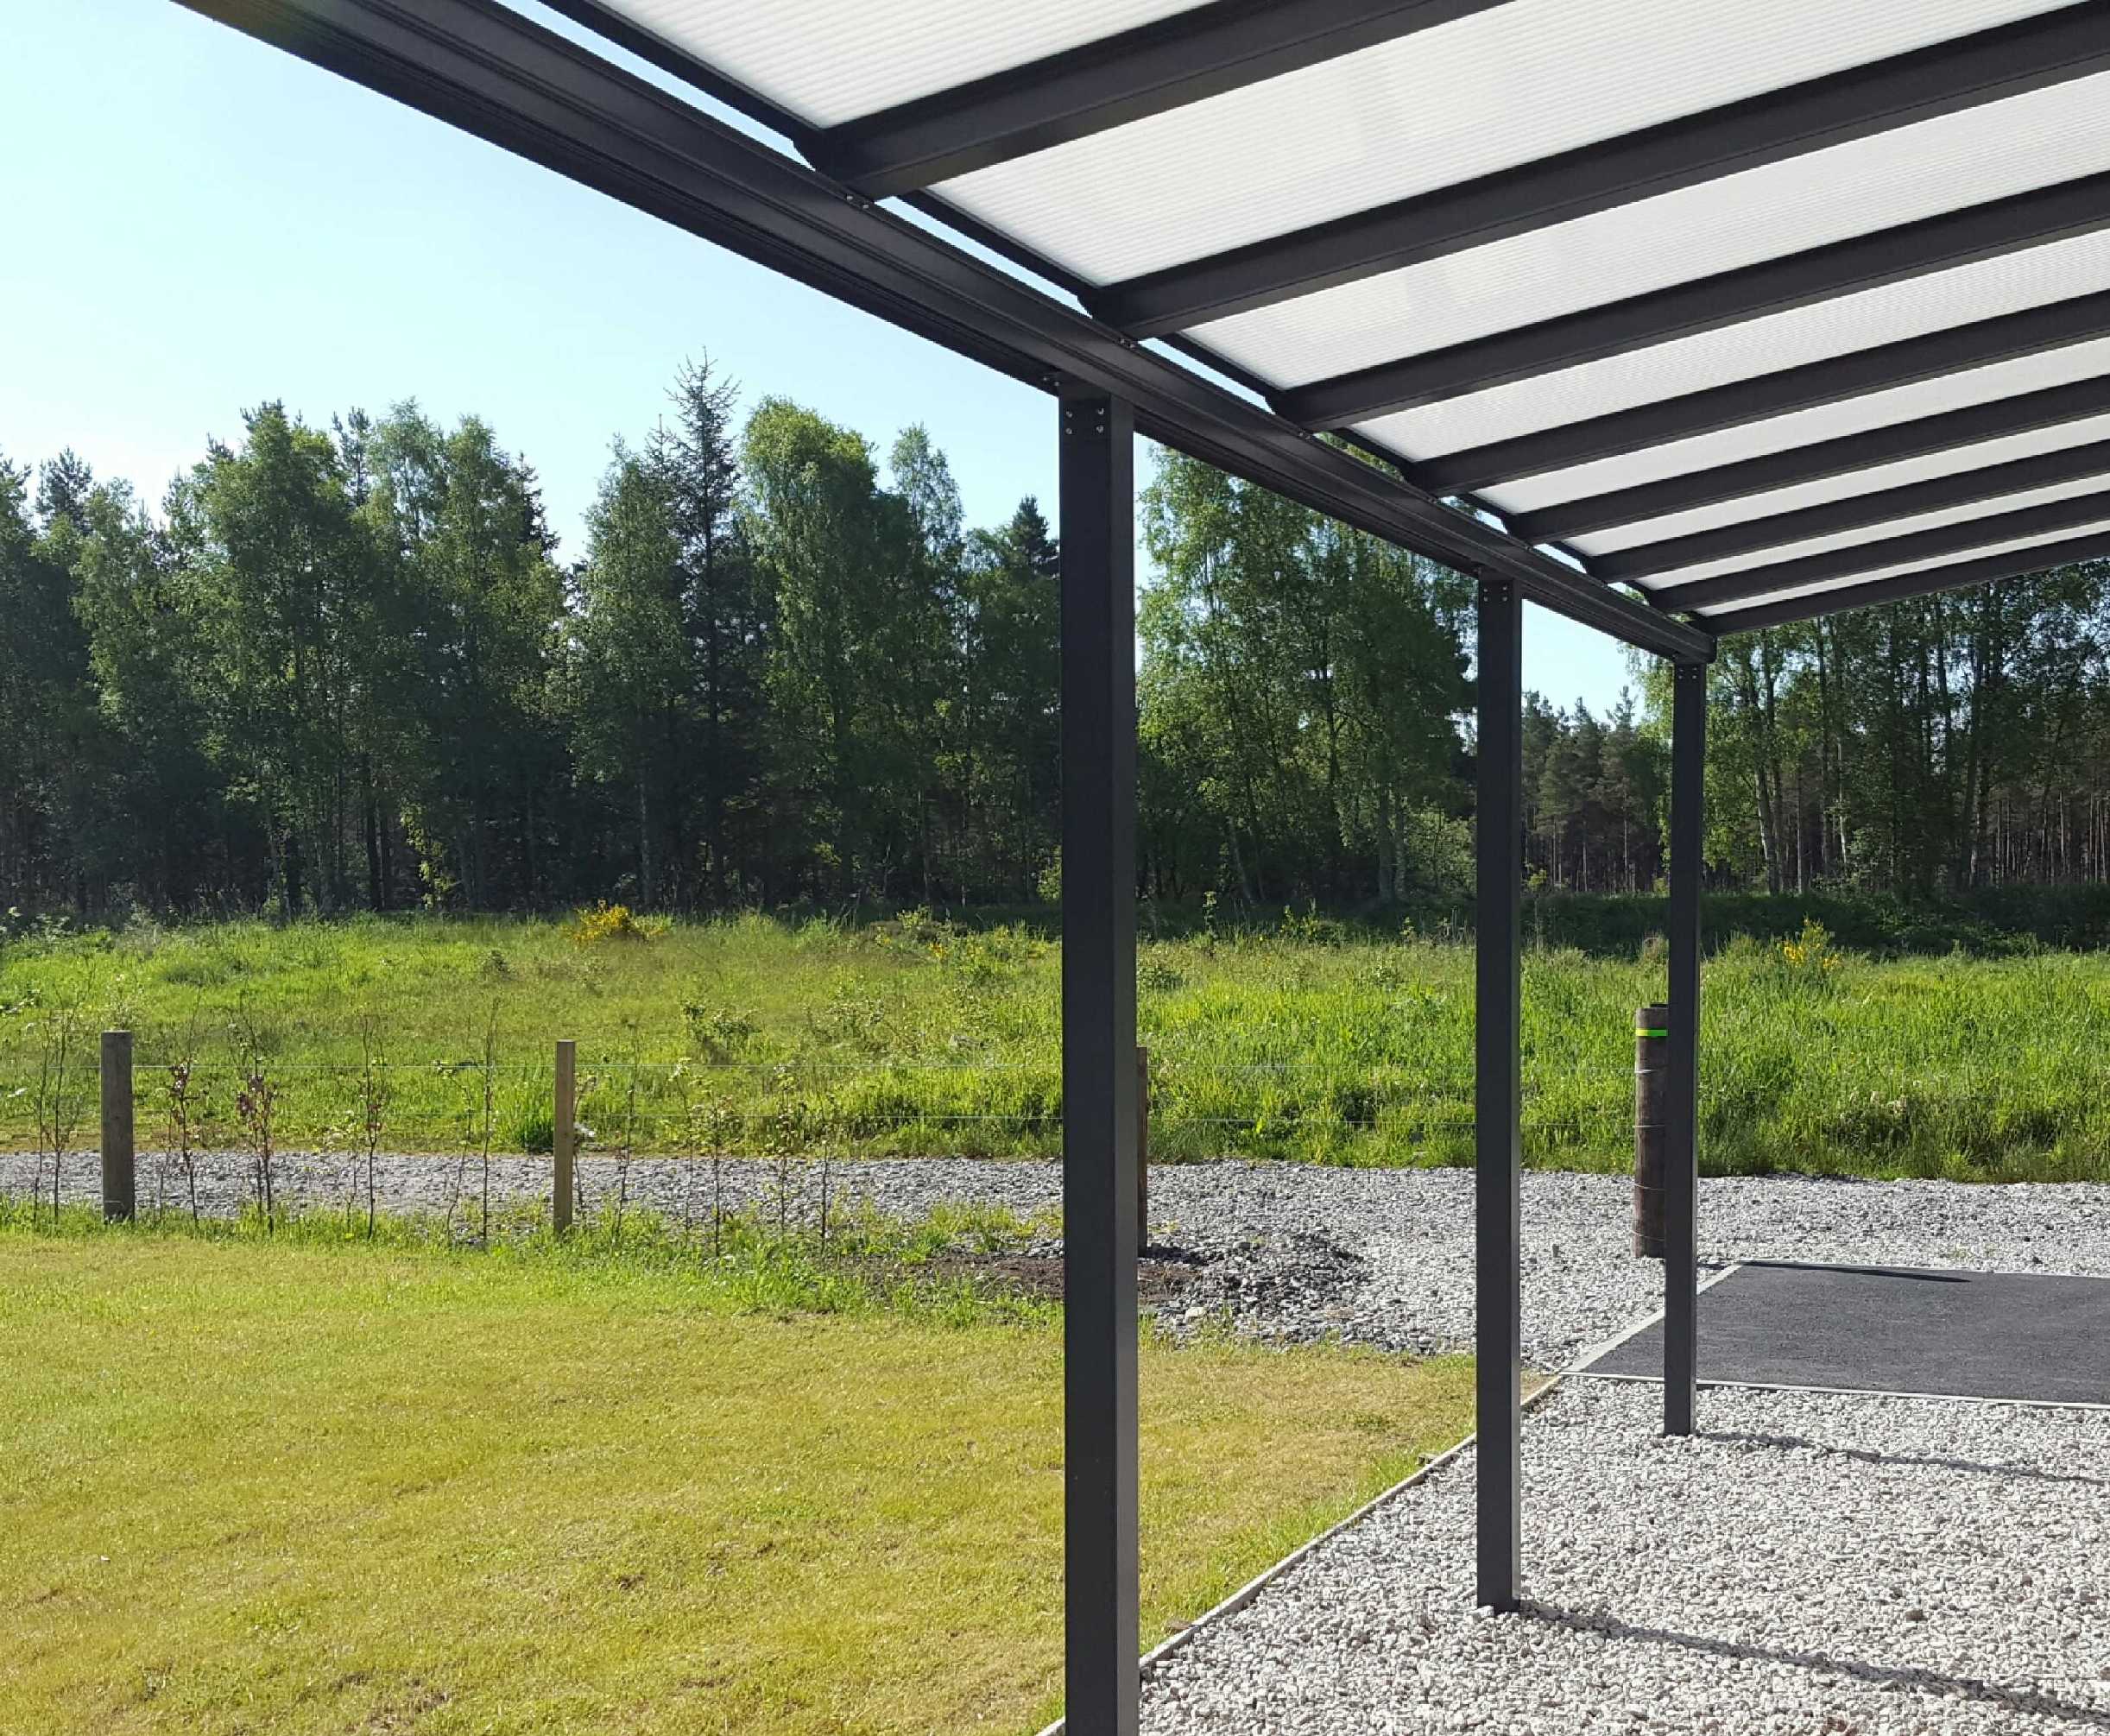 SPECIAL OFFER Omega Smart Lean-To Canopy, Anthracite Grey, 16mm Polycarbonate Glazing - 2.5m (W) x 2.0m (P), (2) Supporting Posts